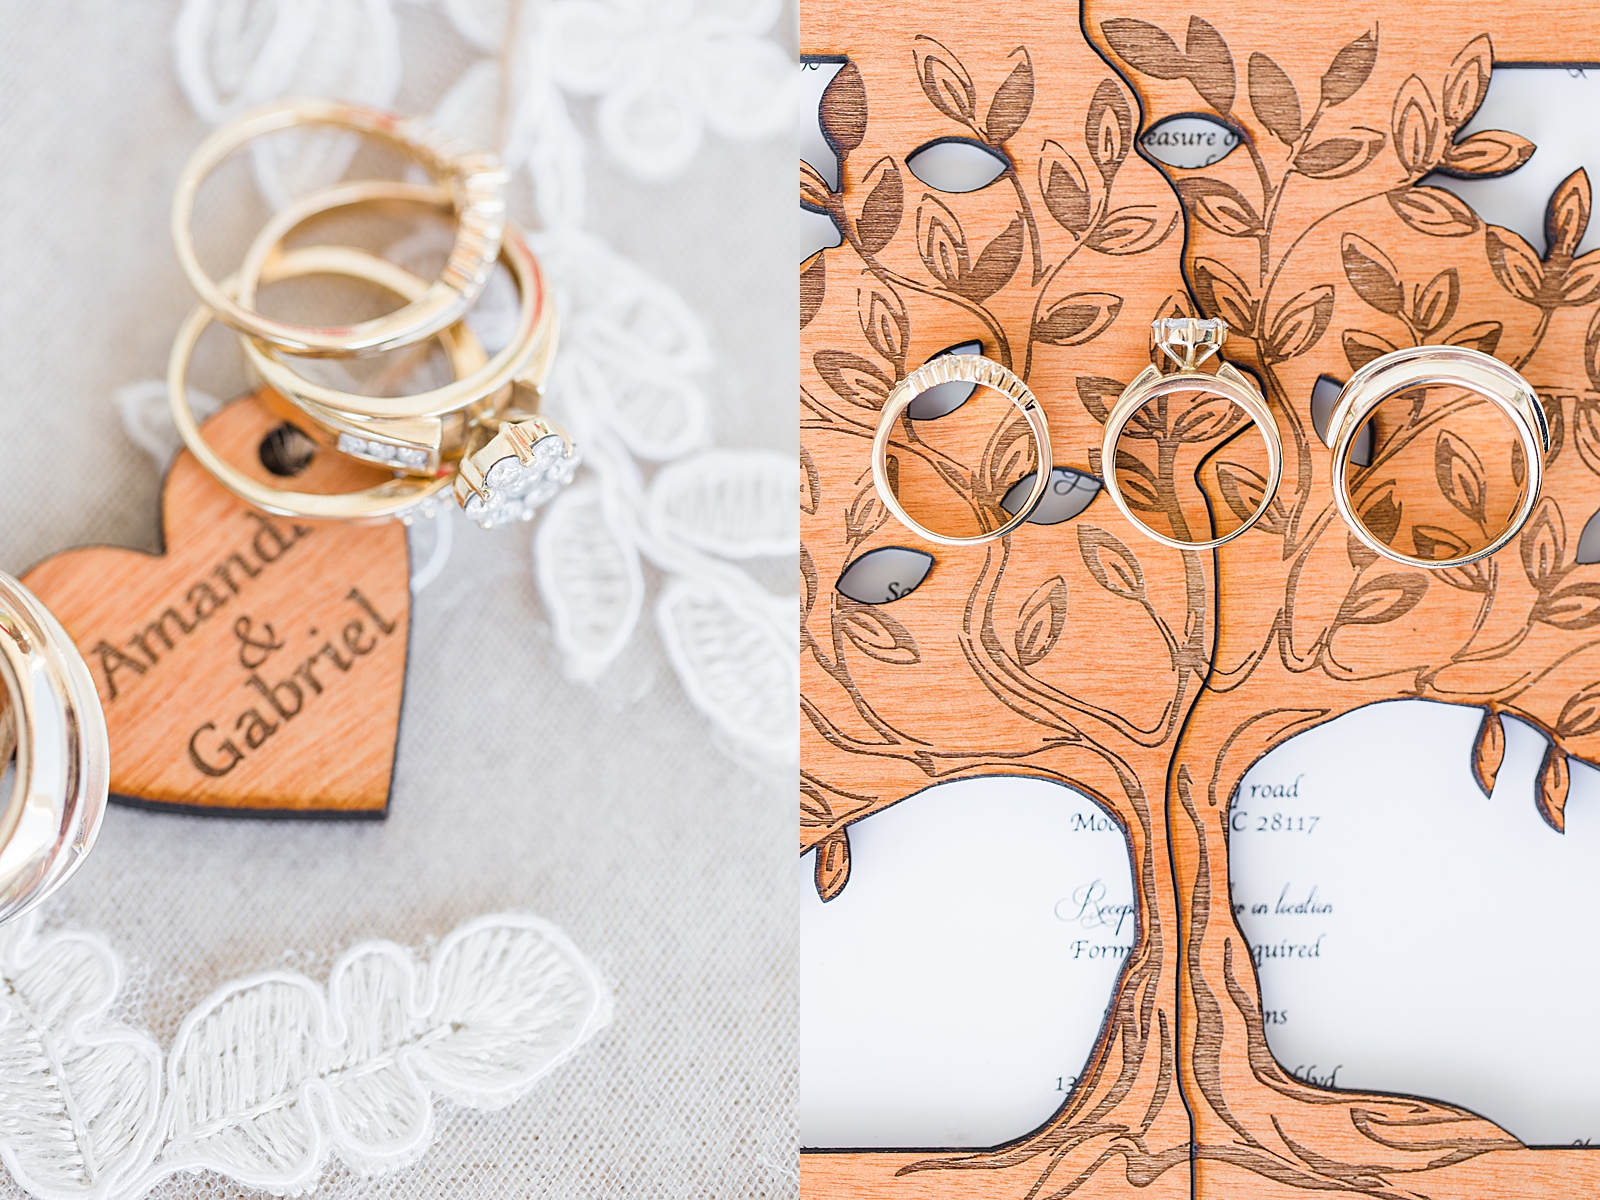 Mooresville Wedding Invitation detail with wedding rings Photos